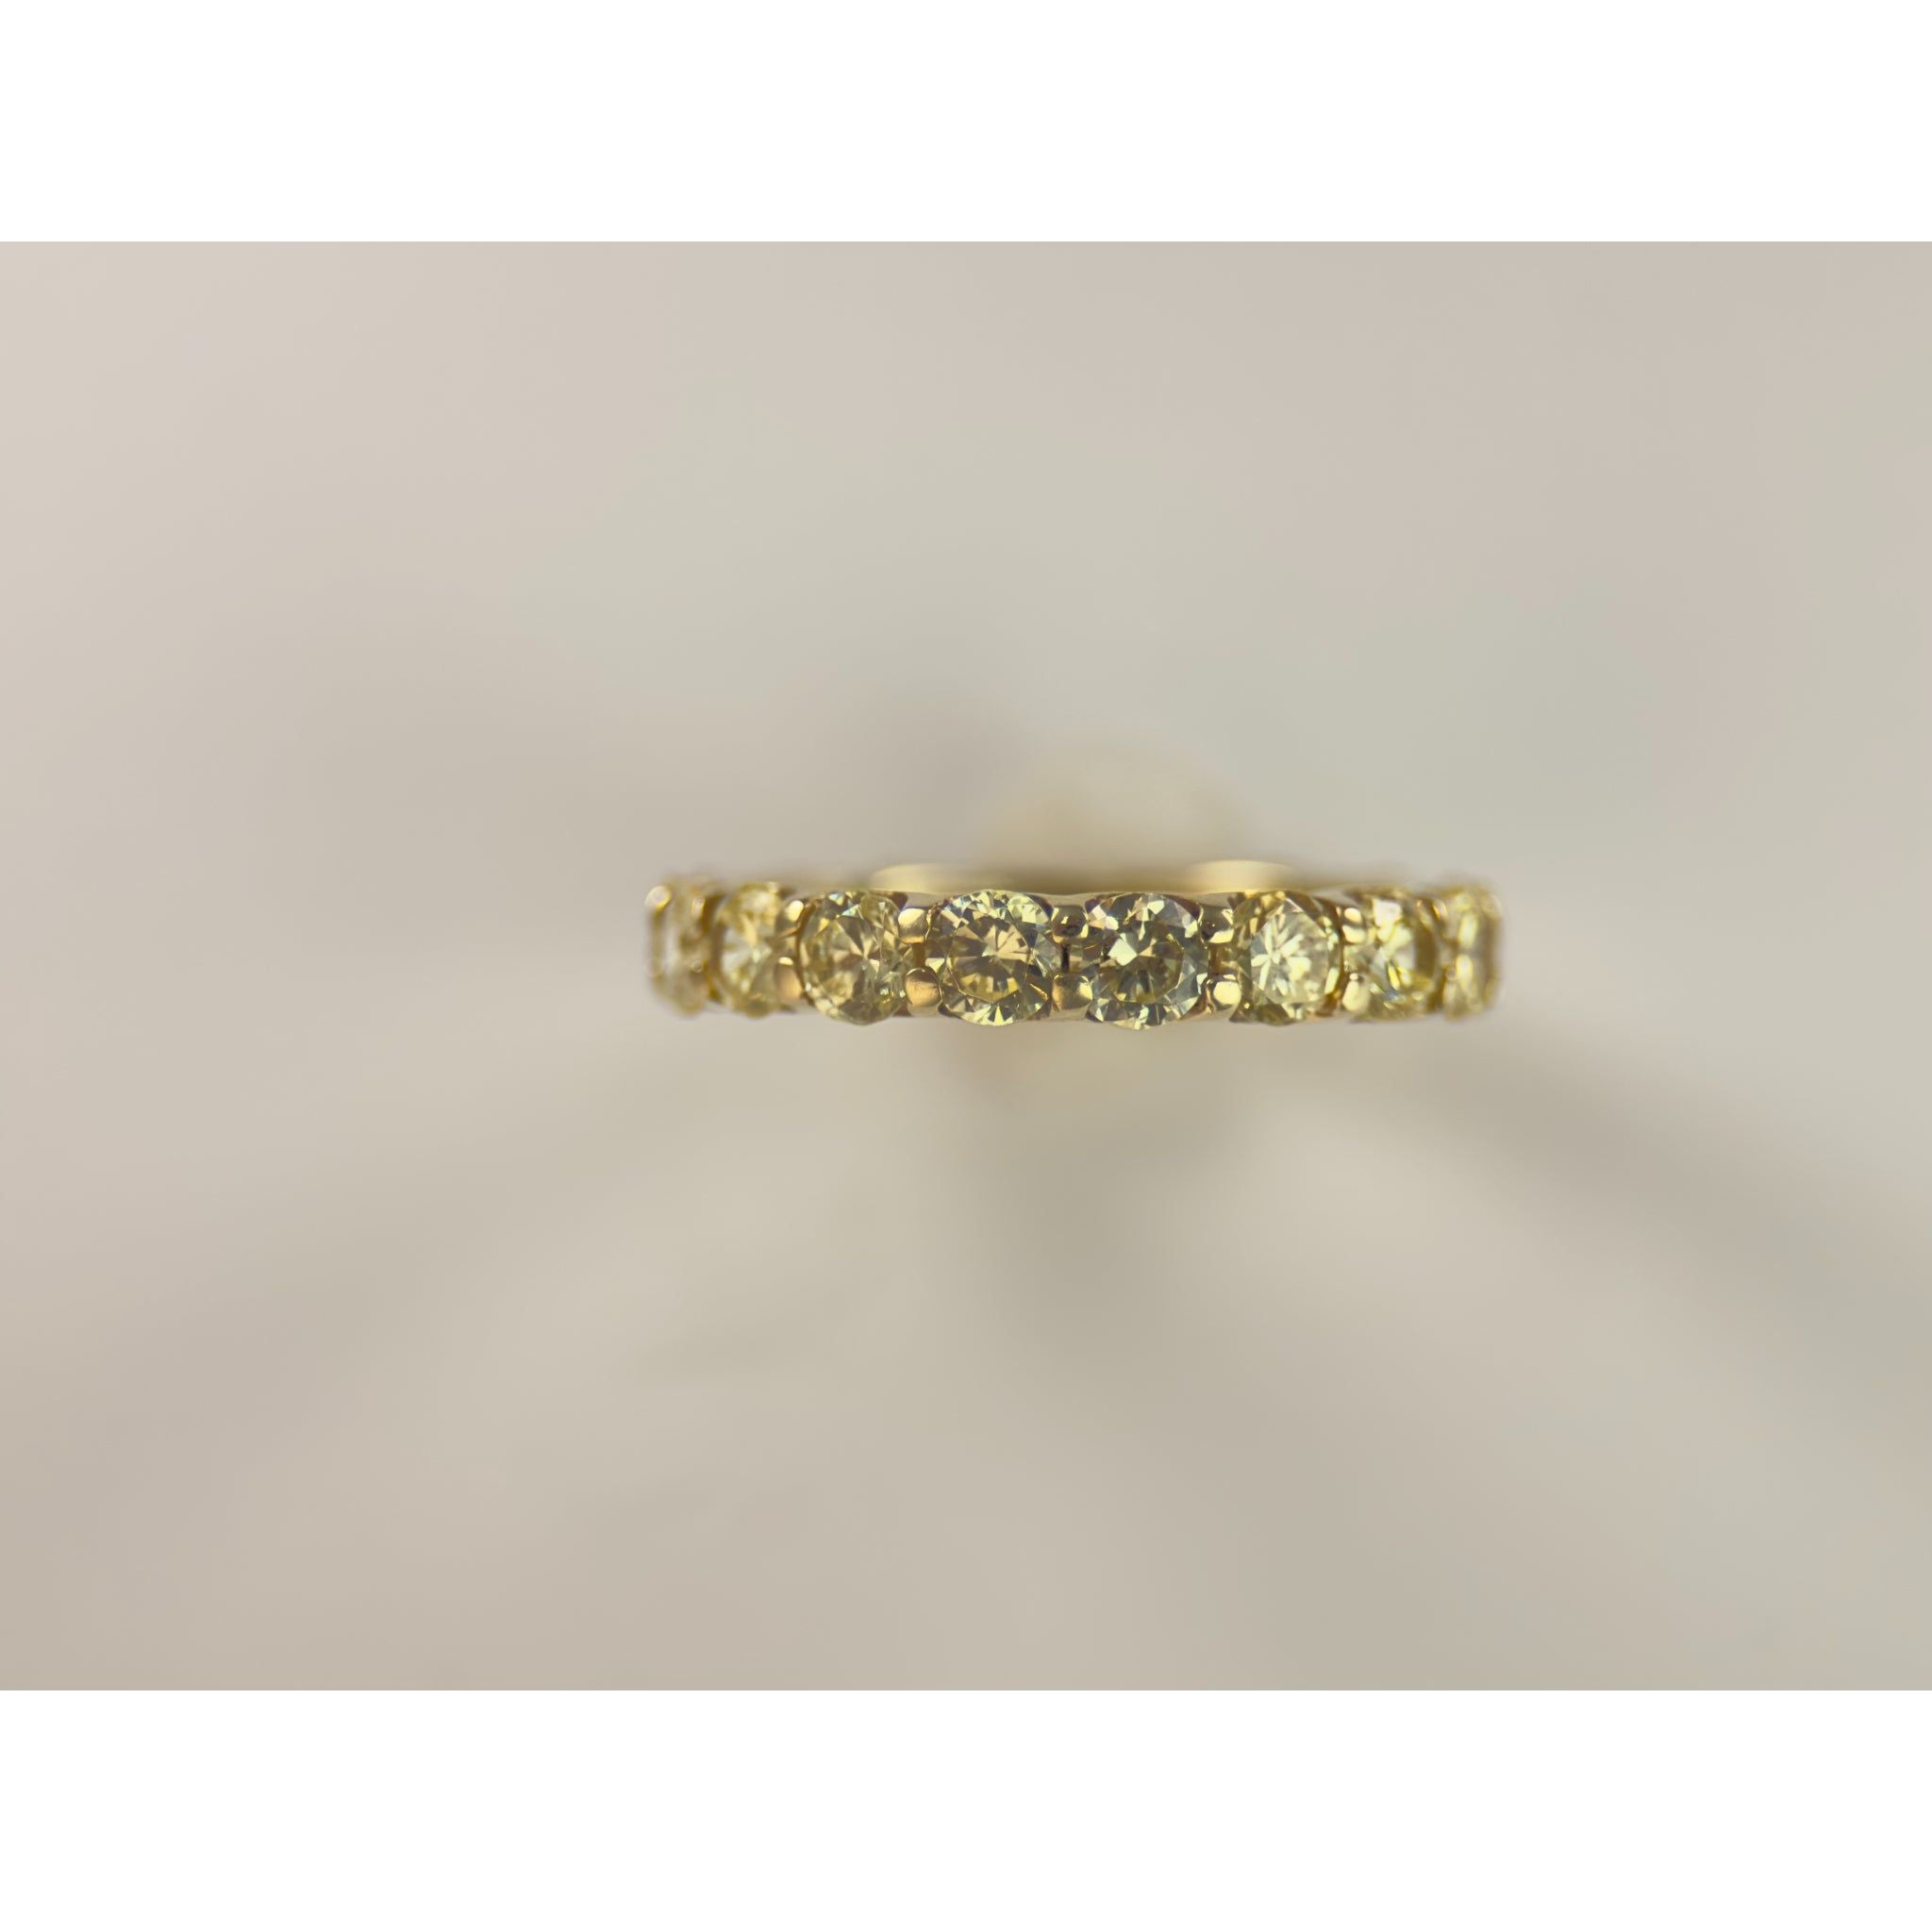 DR2001 - 14K Yellow Gold - Lab Created Stones - Ladies Gold Rings - Eternity Band